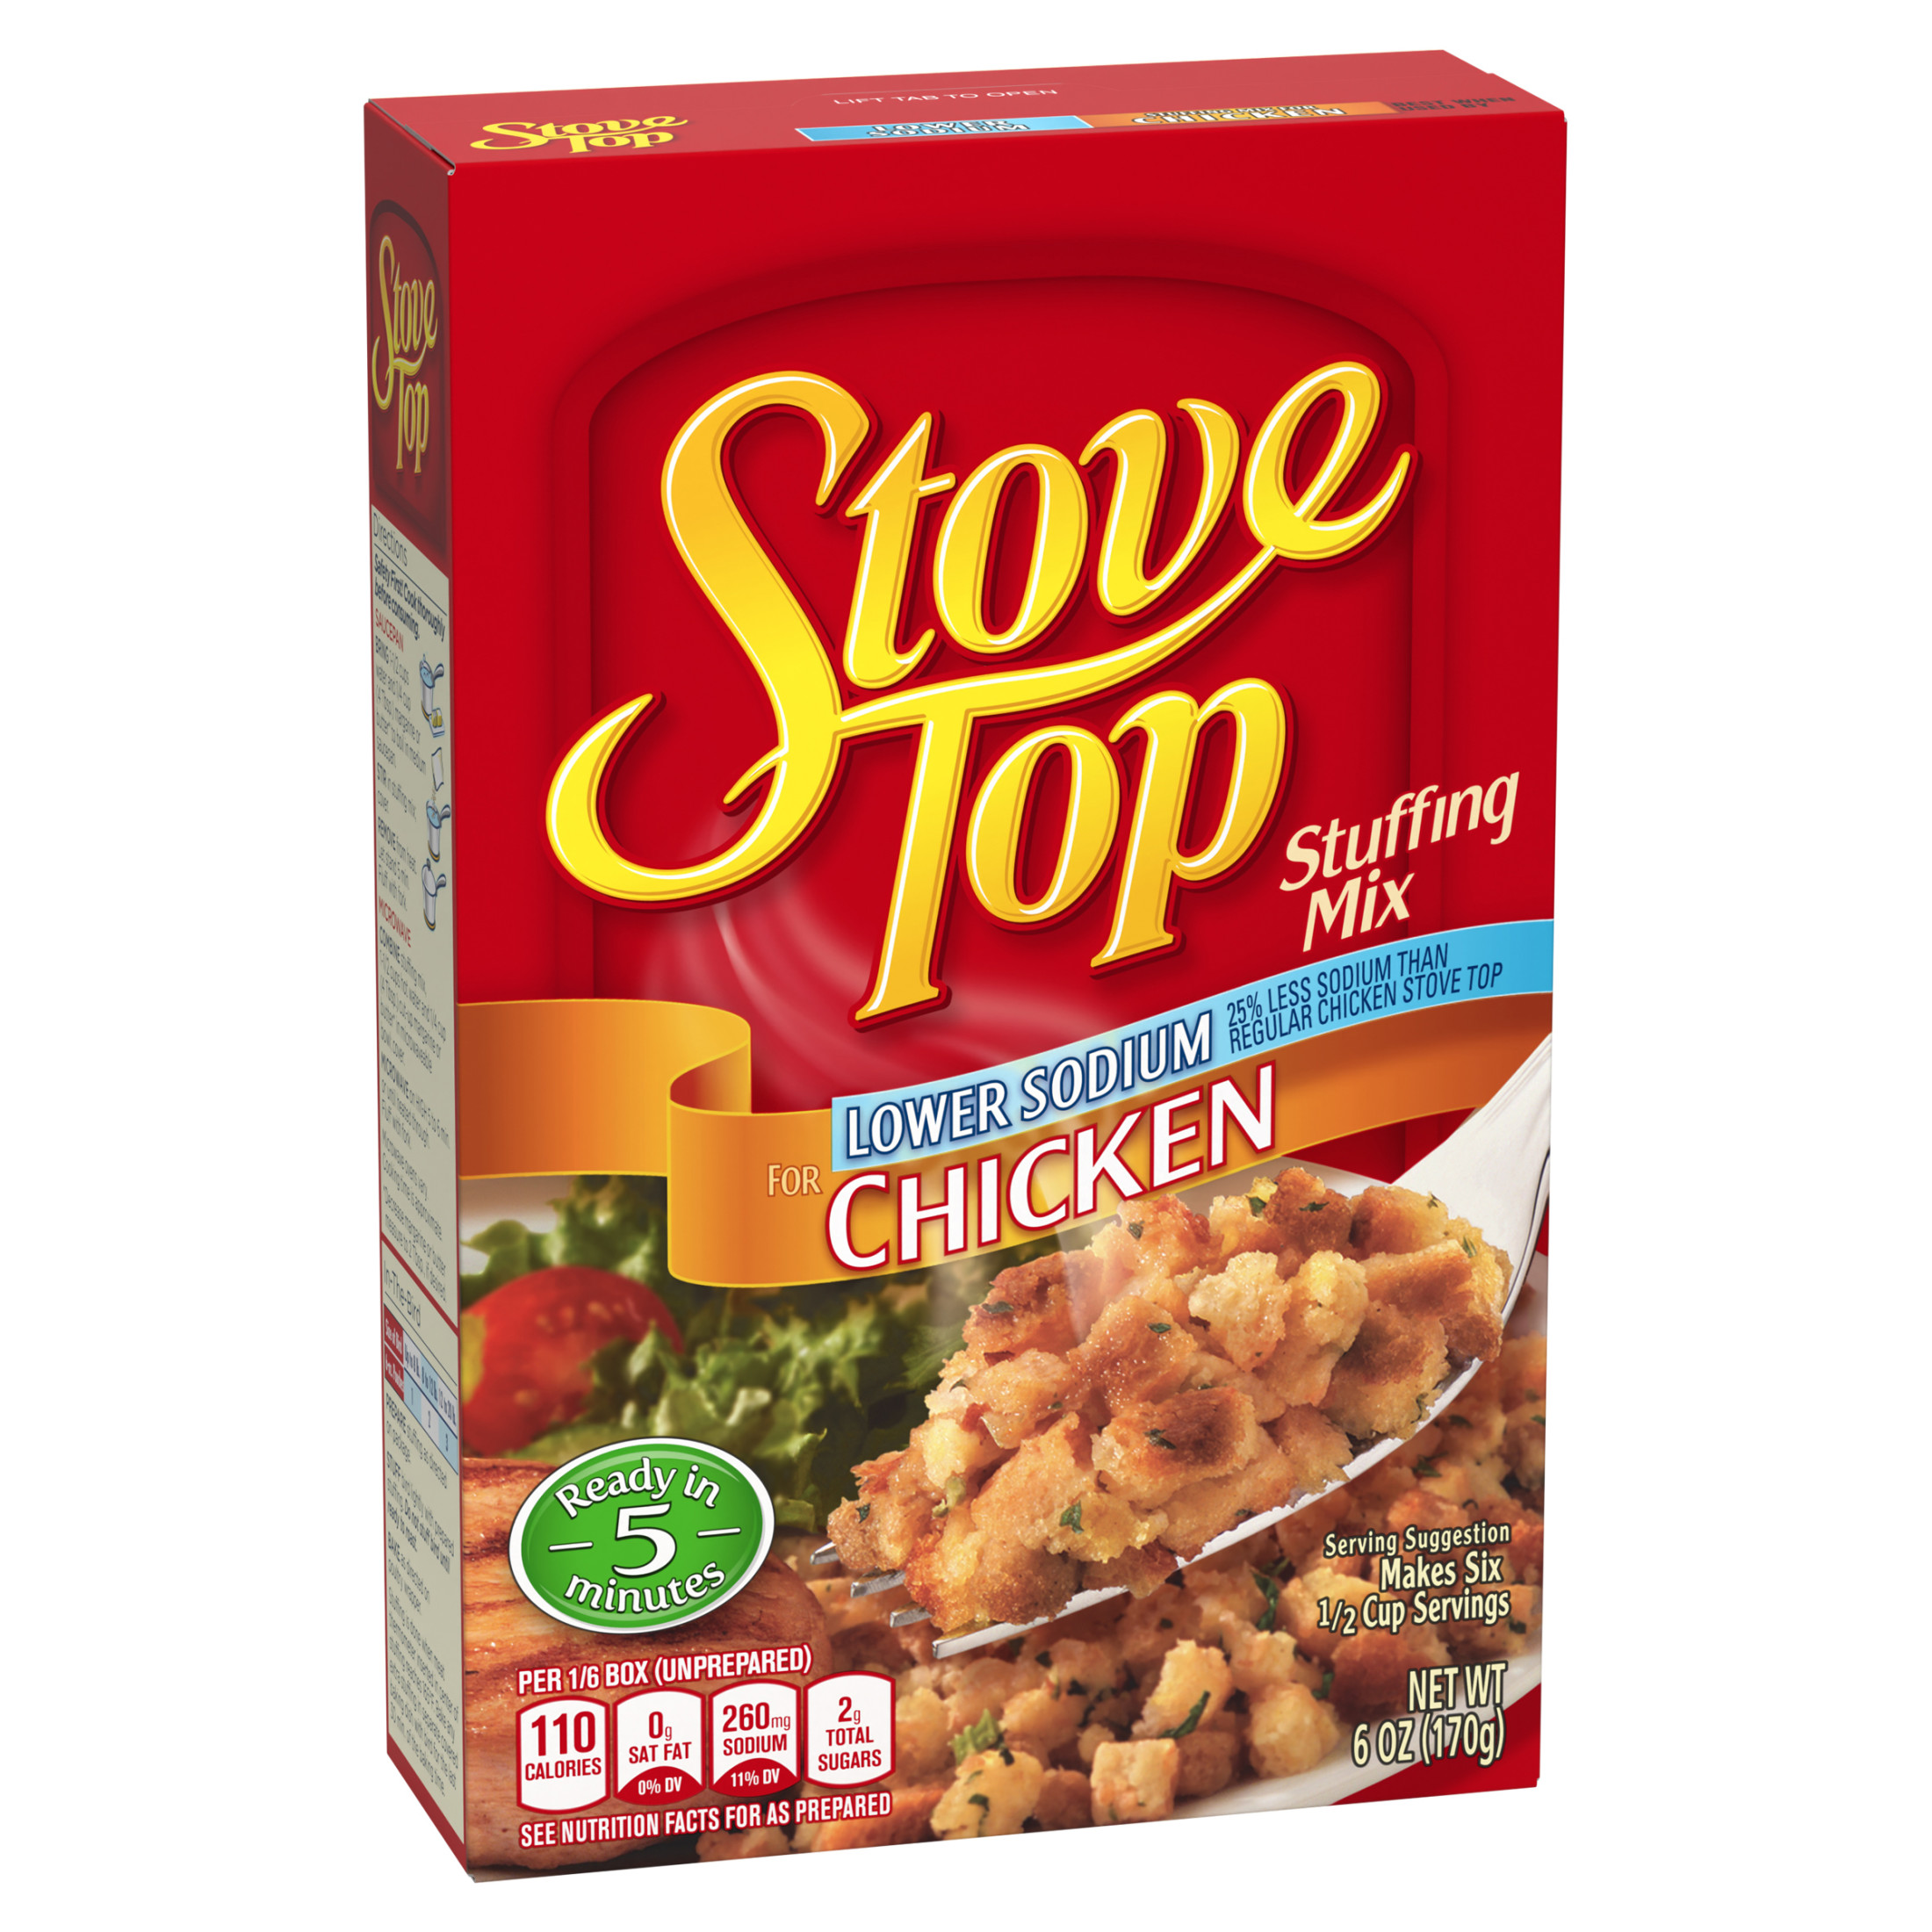 Stove Top Low Sodium Chicken Stuffing Mix Side Dish with 25% Less Sodium, 6 oz Box - image 5 of 8